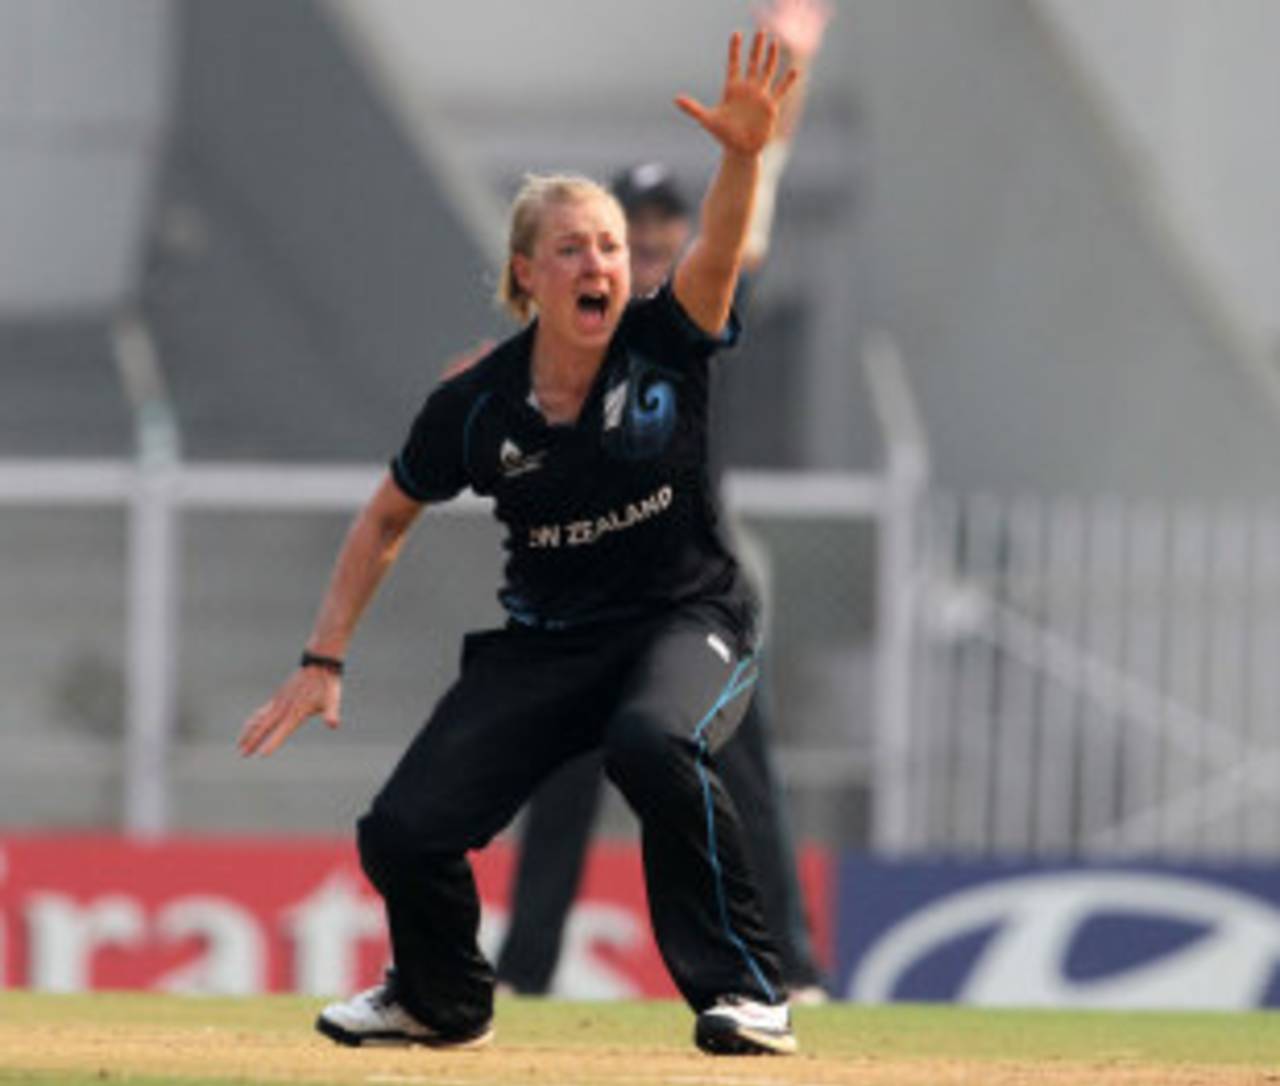 Sian Ruck was one of four New Zealand women players to be handed professional contracts last year&nbsp;&nbsp;&bull;&nbsp;&nbsp;ICC/Solaris Images